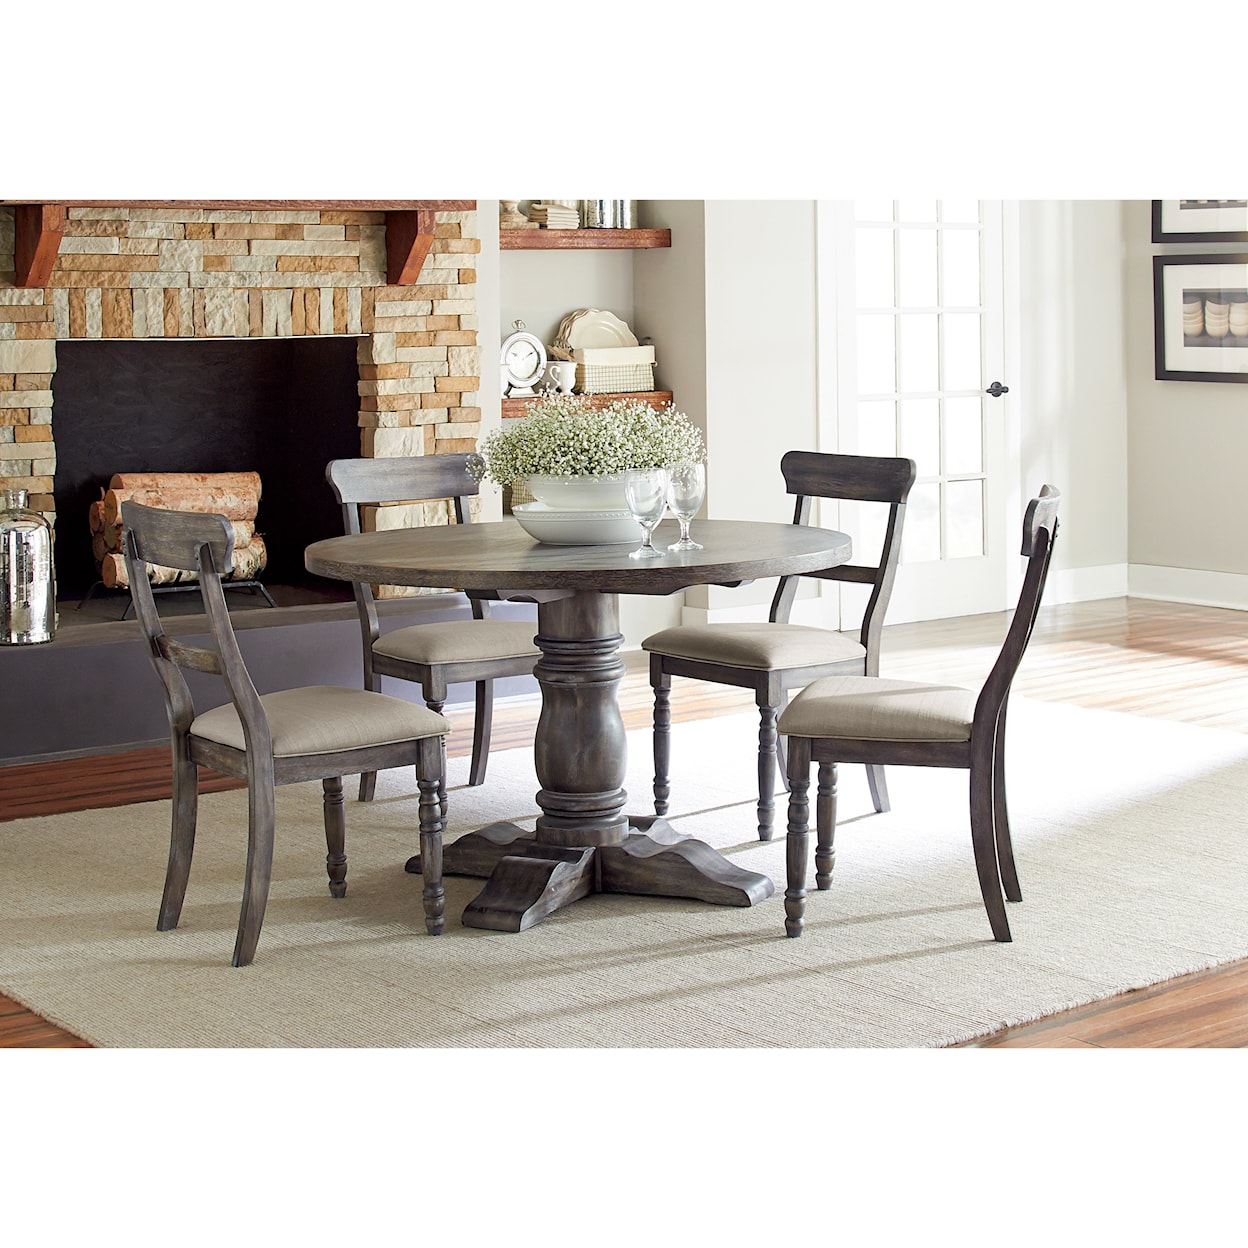 Progressive Furniture Muses Round Dining Table